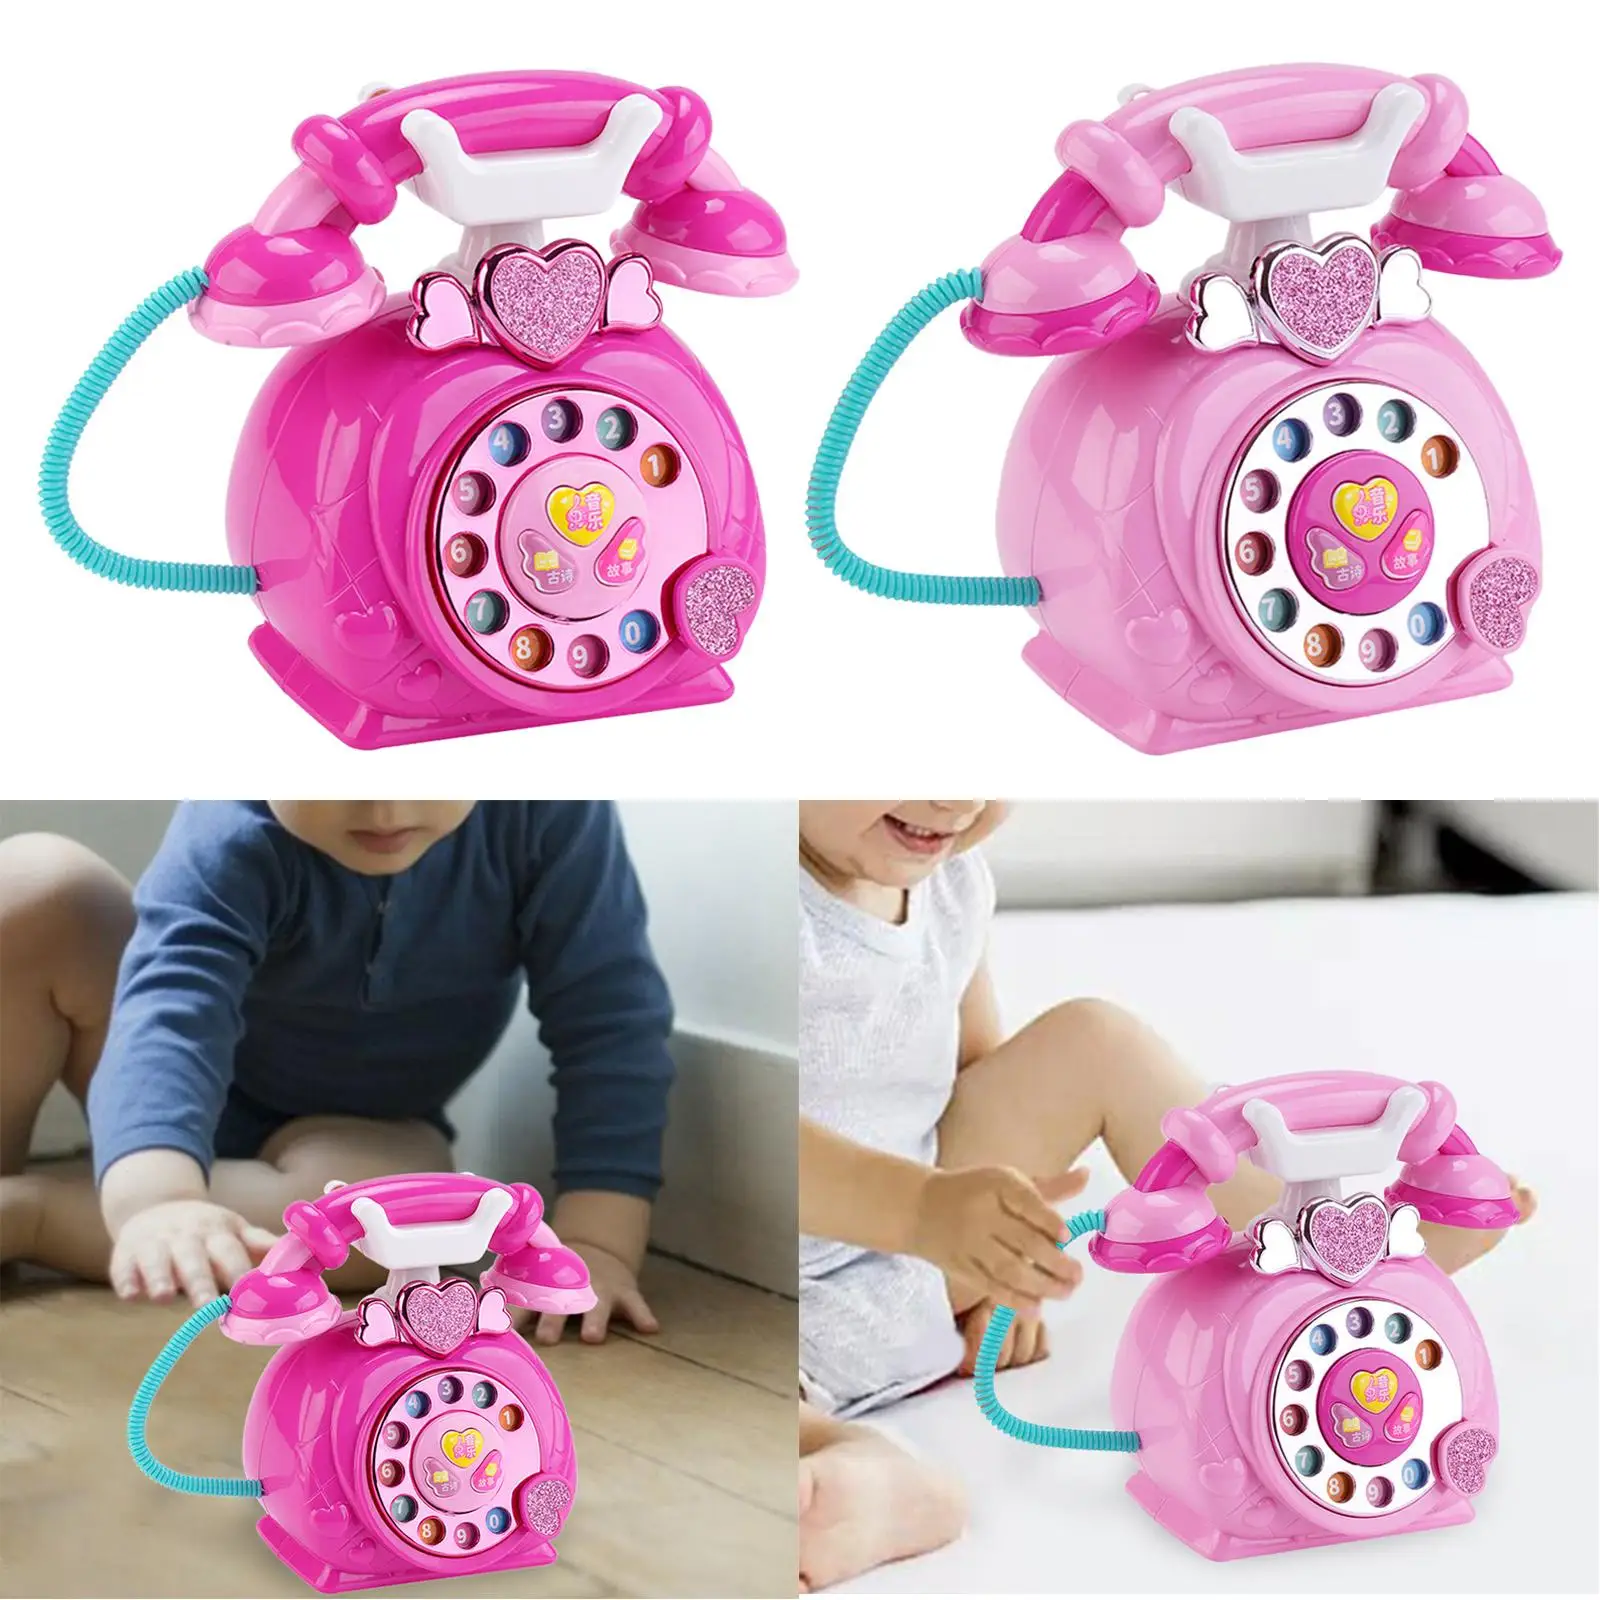 Telephone Toy Storytelling Machine Multifunction with Light for Pretend Play